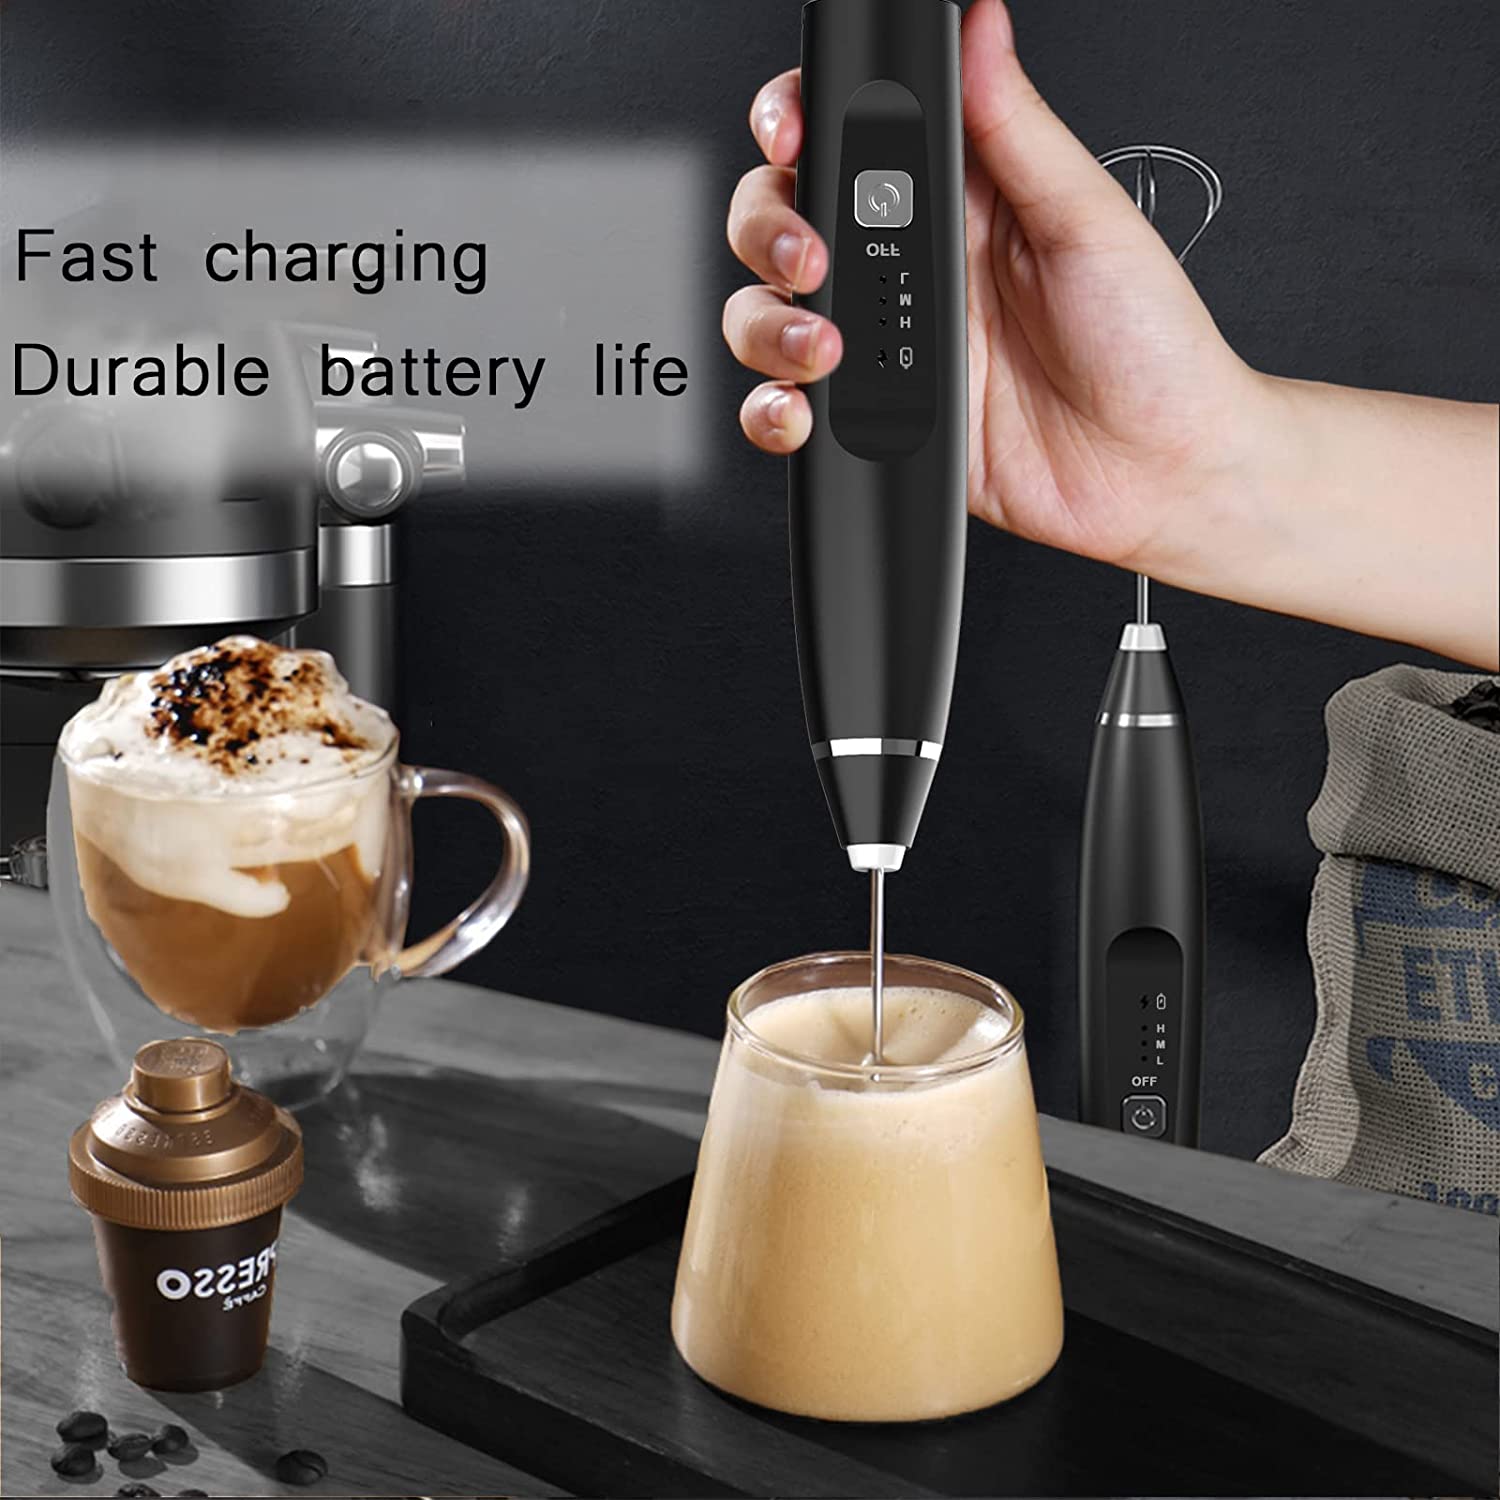 Electric Coffee Frother Hand Blender Accessory for Hot Chocolate,Drinks  Anti Slip Durable Compact Size Comfortable Grip Simple to Use , Black 